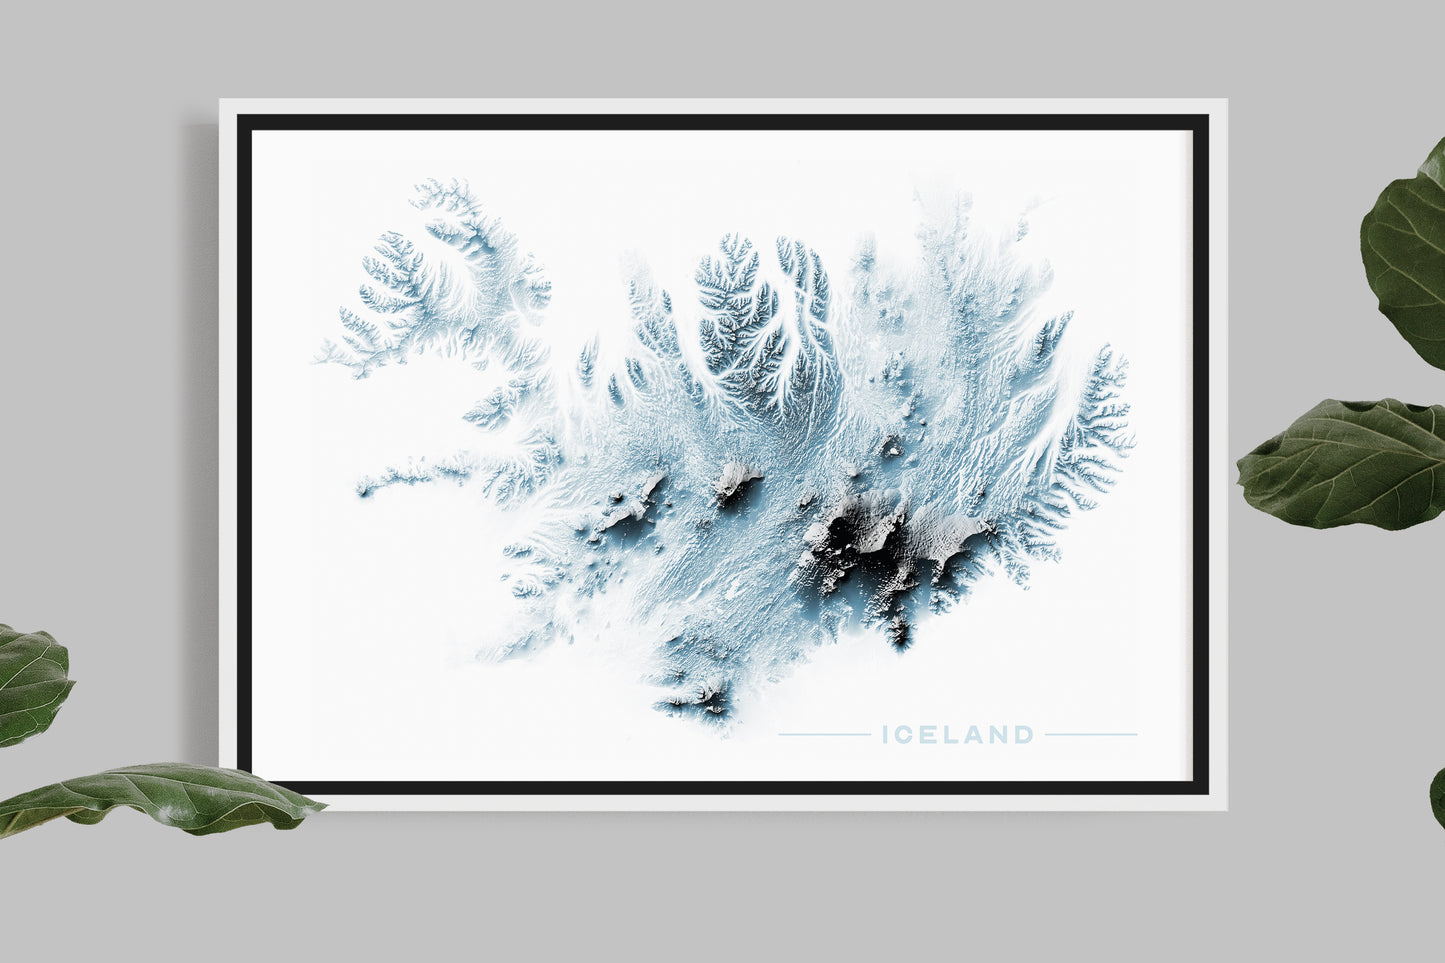 Iceland - 3D Relief Effect Map